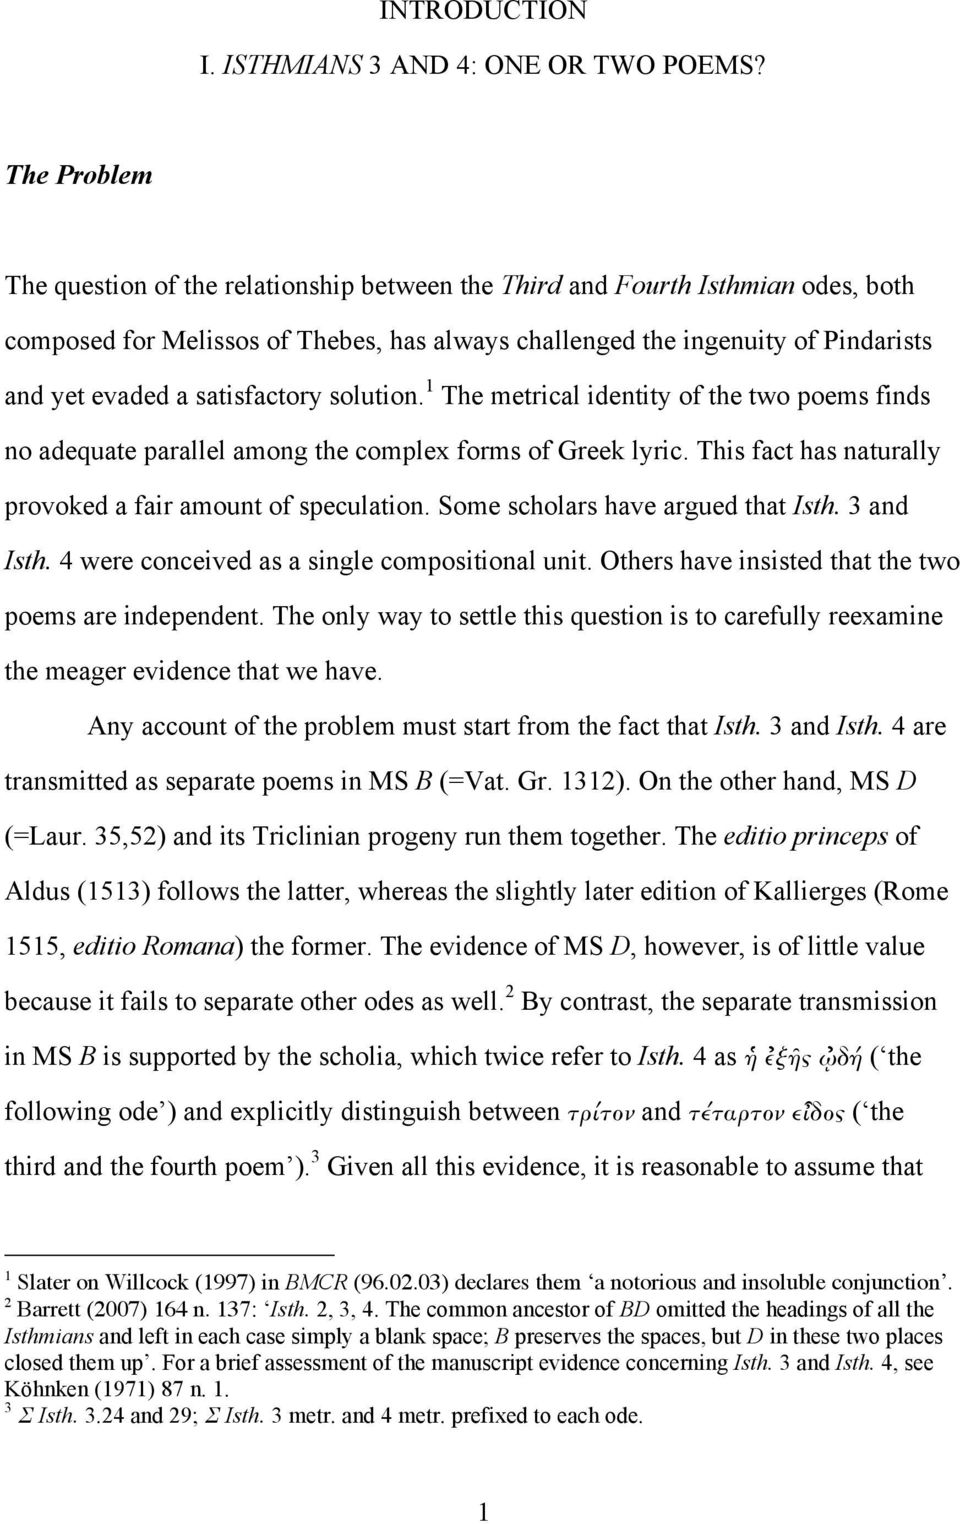 satisfactory solution. 1 The metrical identity of the two poems finds no adequate parallel among the complex forms of Greek lyric. This fact has naturally provoked a fair amount of speculation.